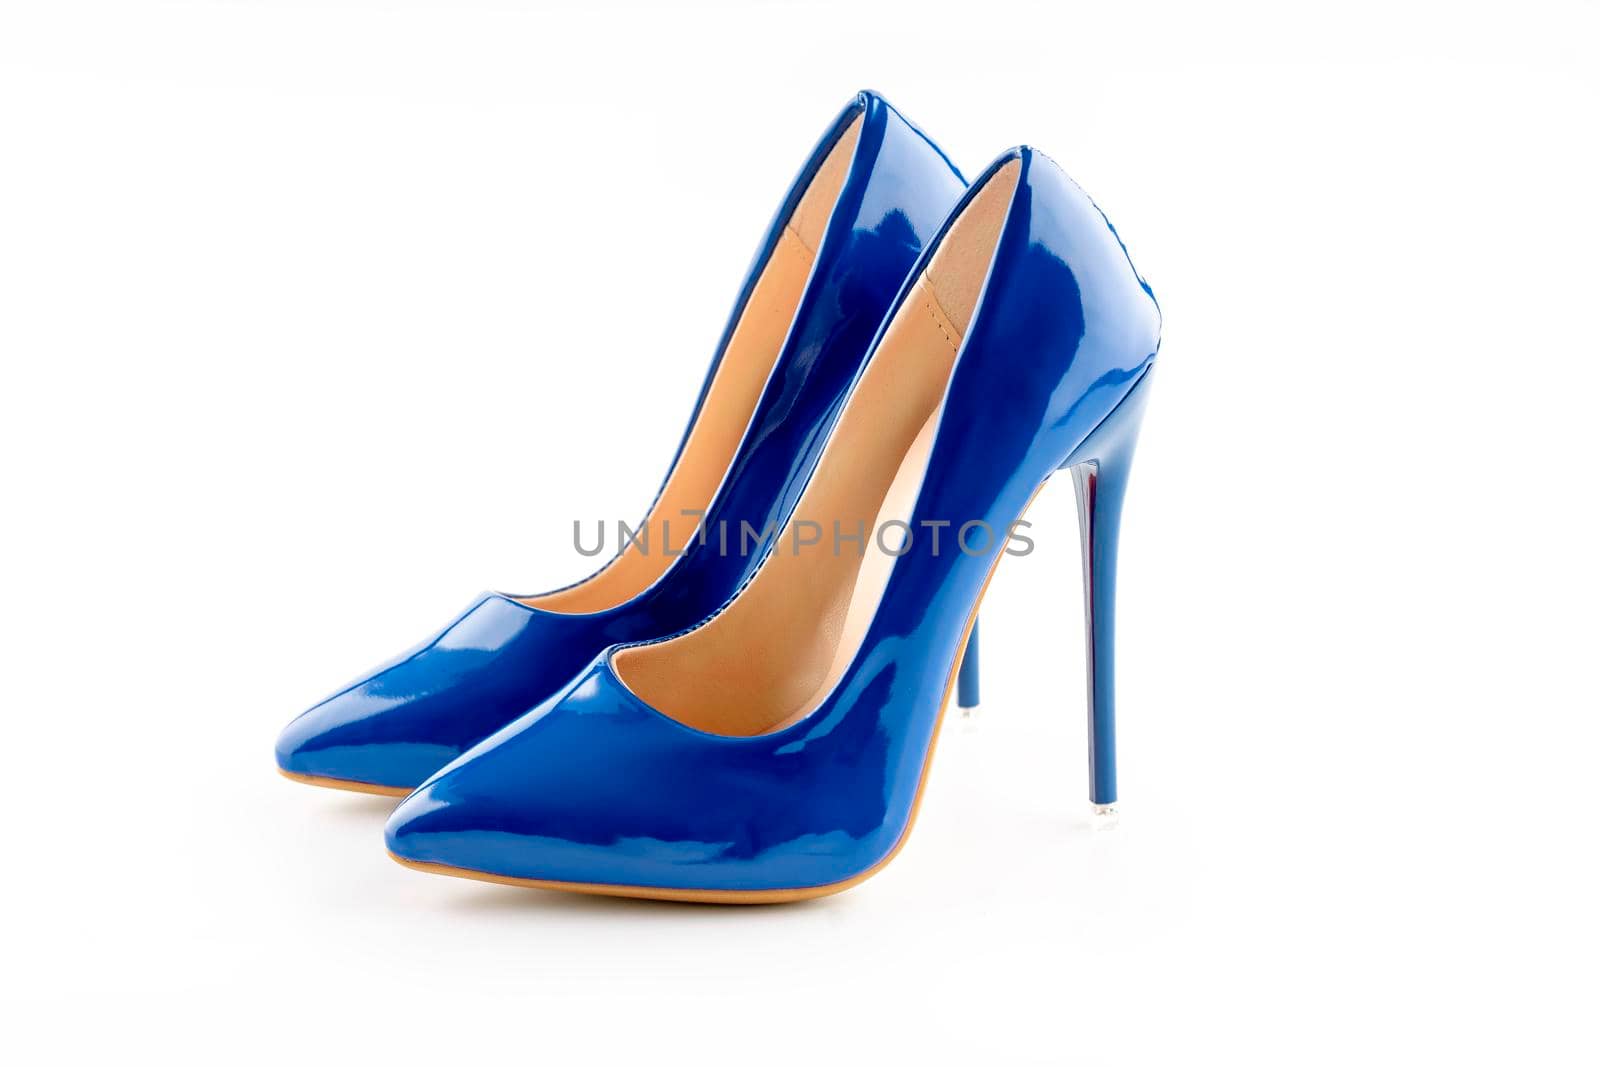 a pair of blue women's high-heeled shoes on white background